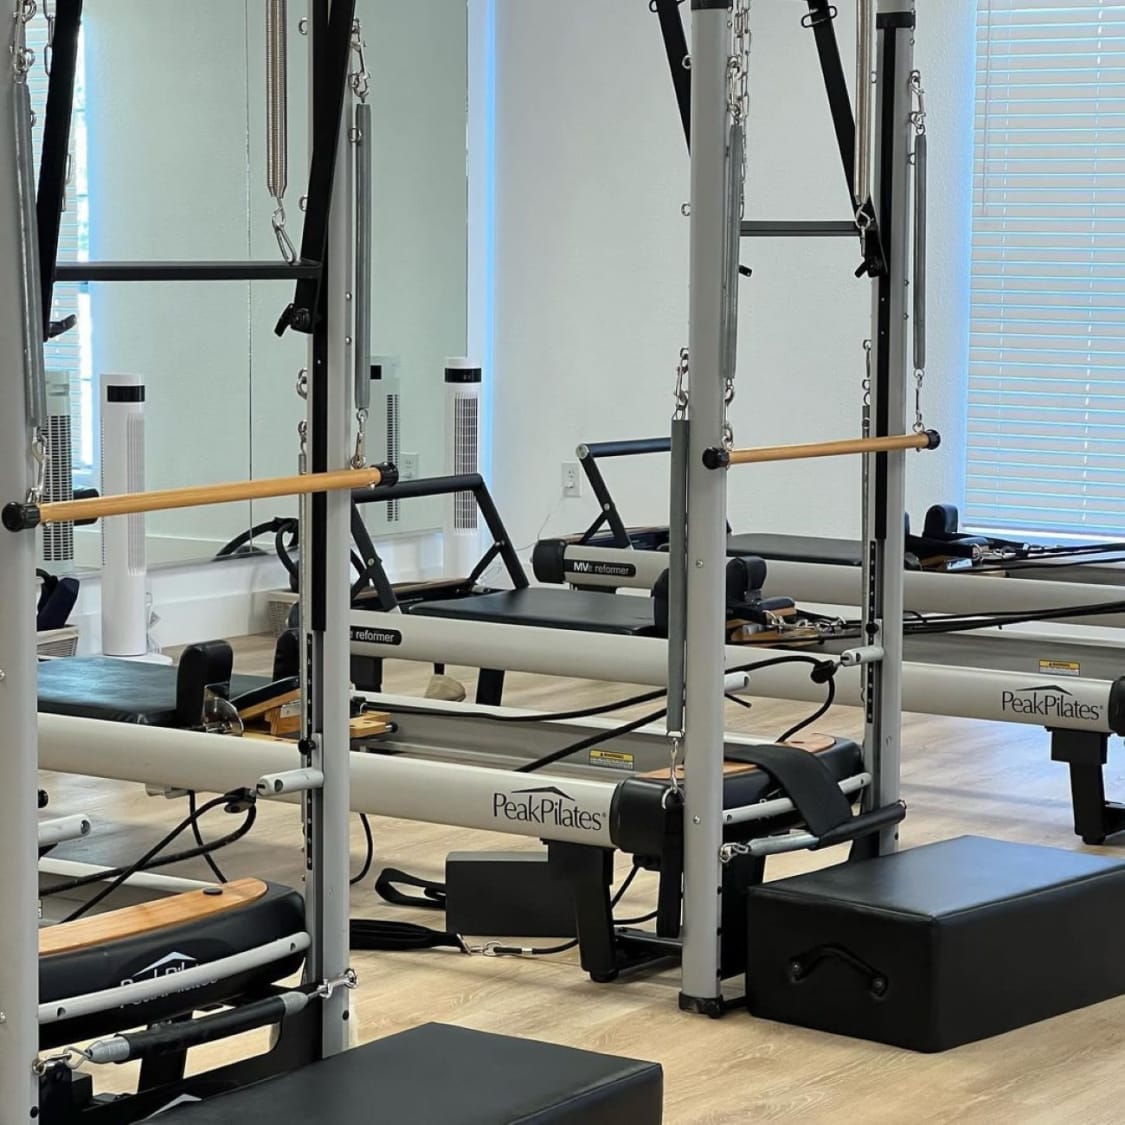 Reform RX Brings the Future of Pilates to Southern California With the  Opening of Its First Experiential Location